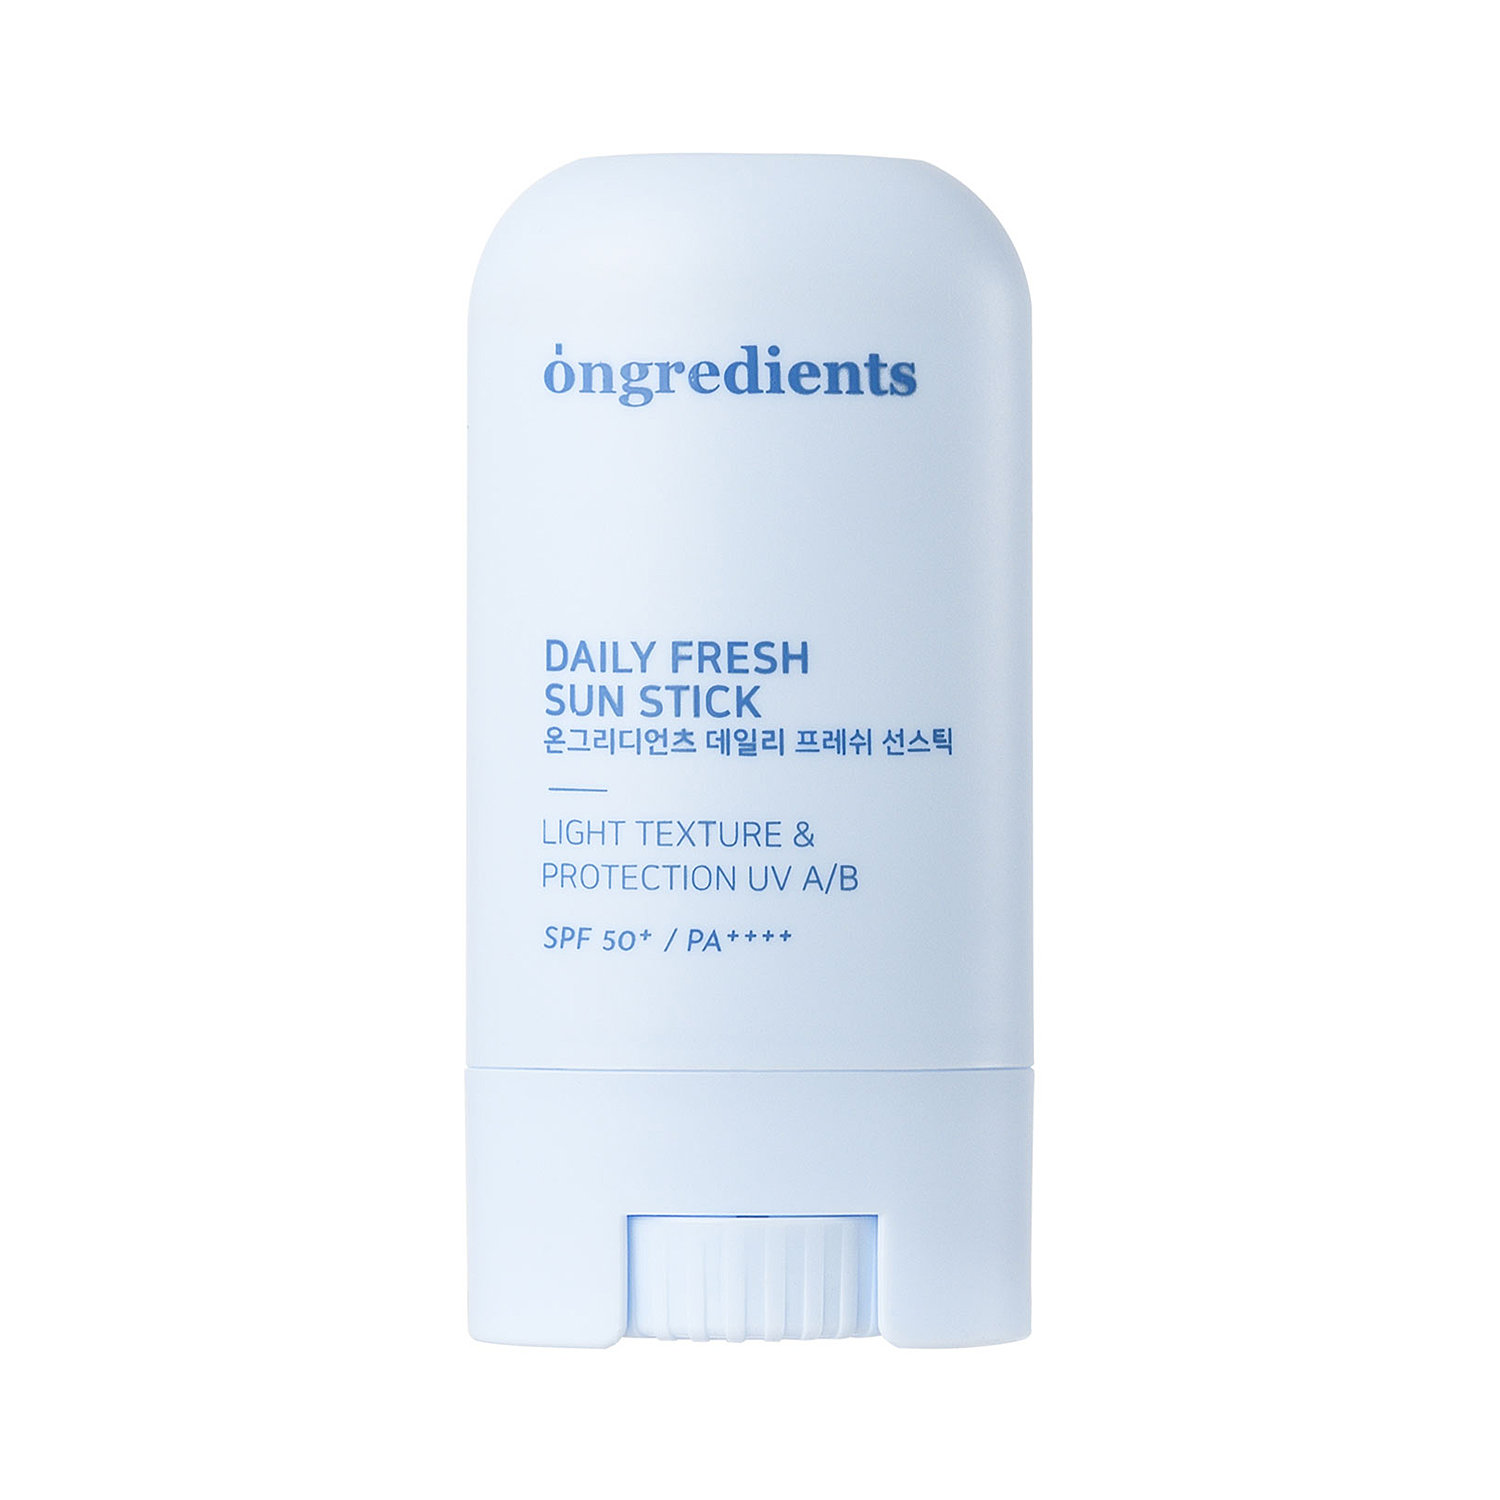 ONGREDIENTS DAILY FRESH SUN STICK